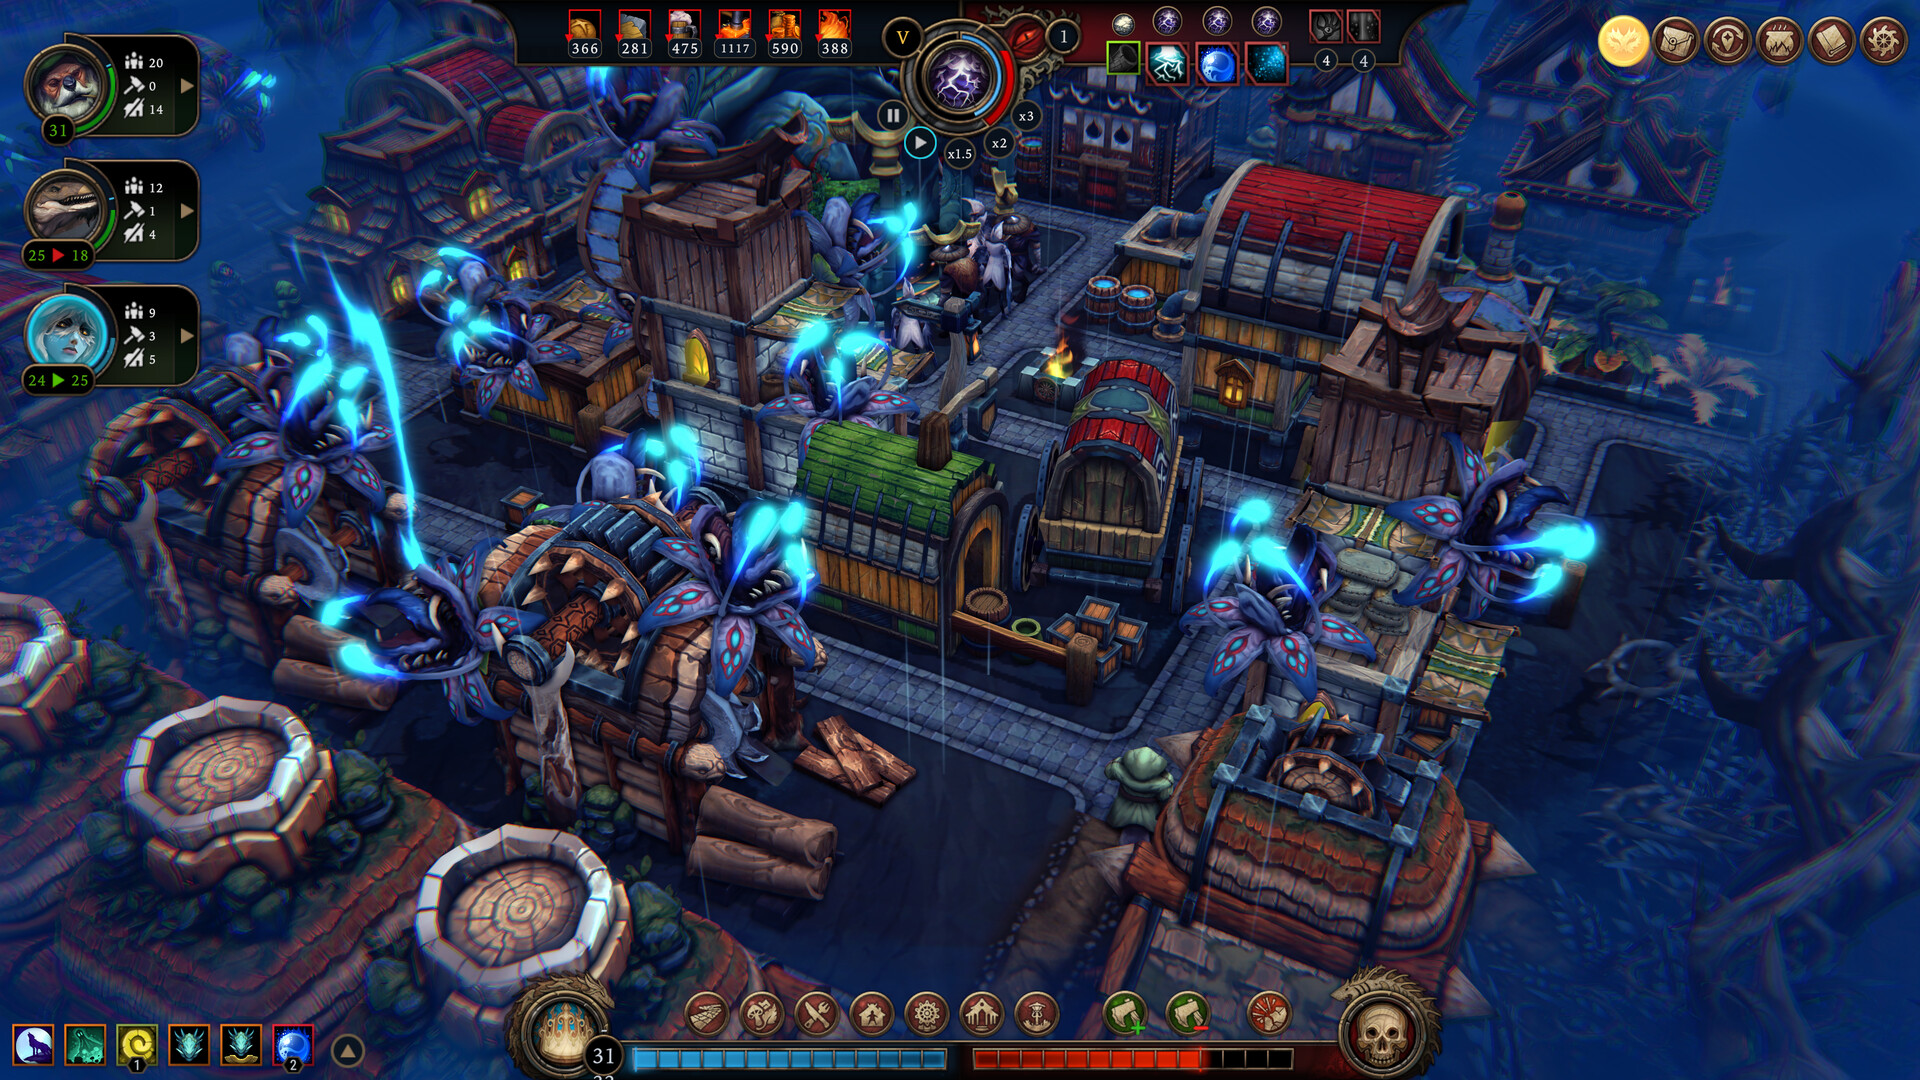 Hugely popular Steam city builder Against the Storm coming to PC